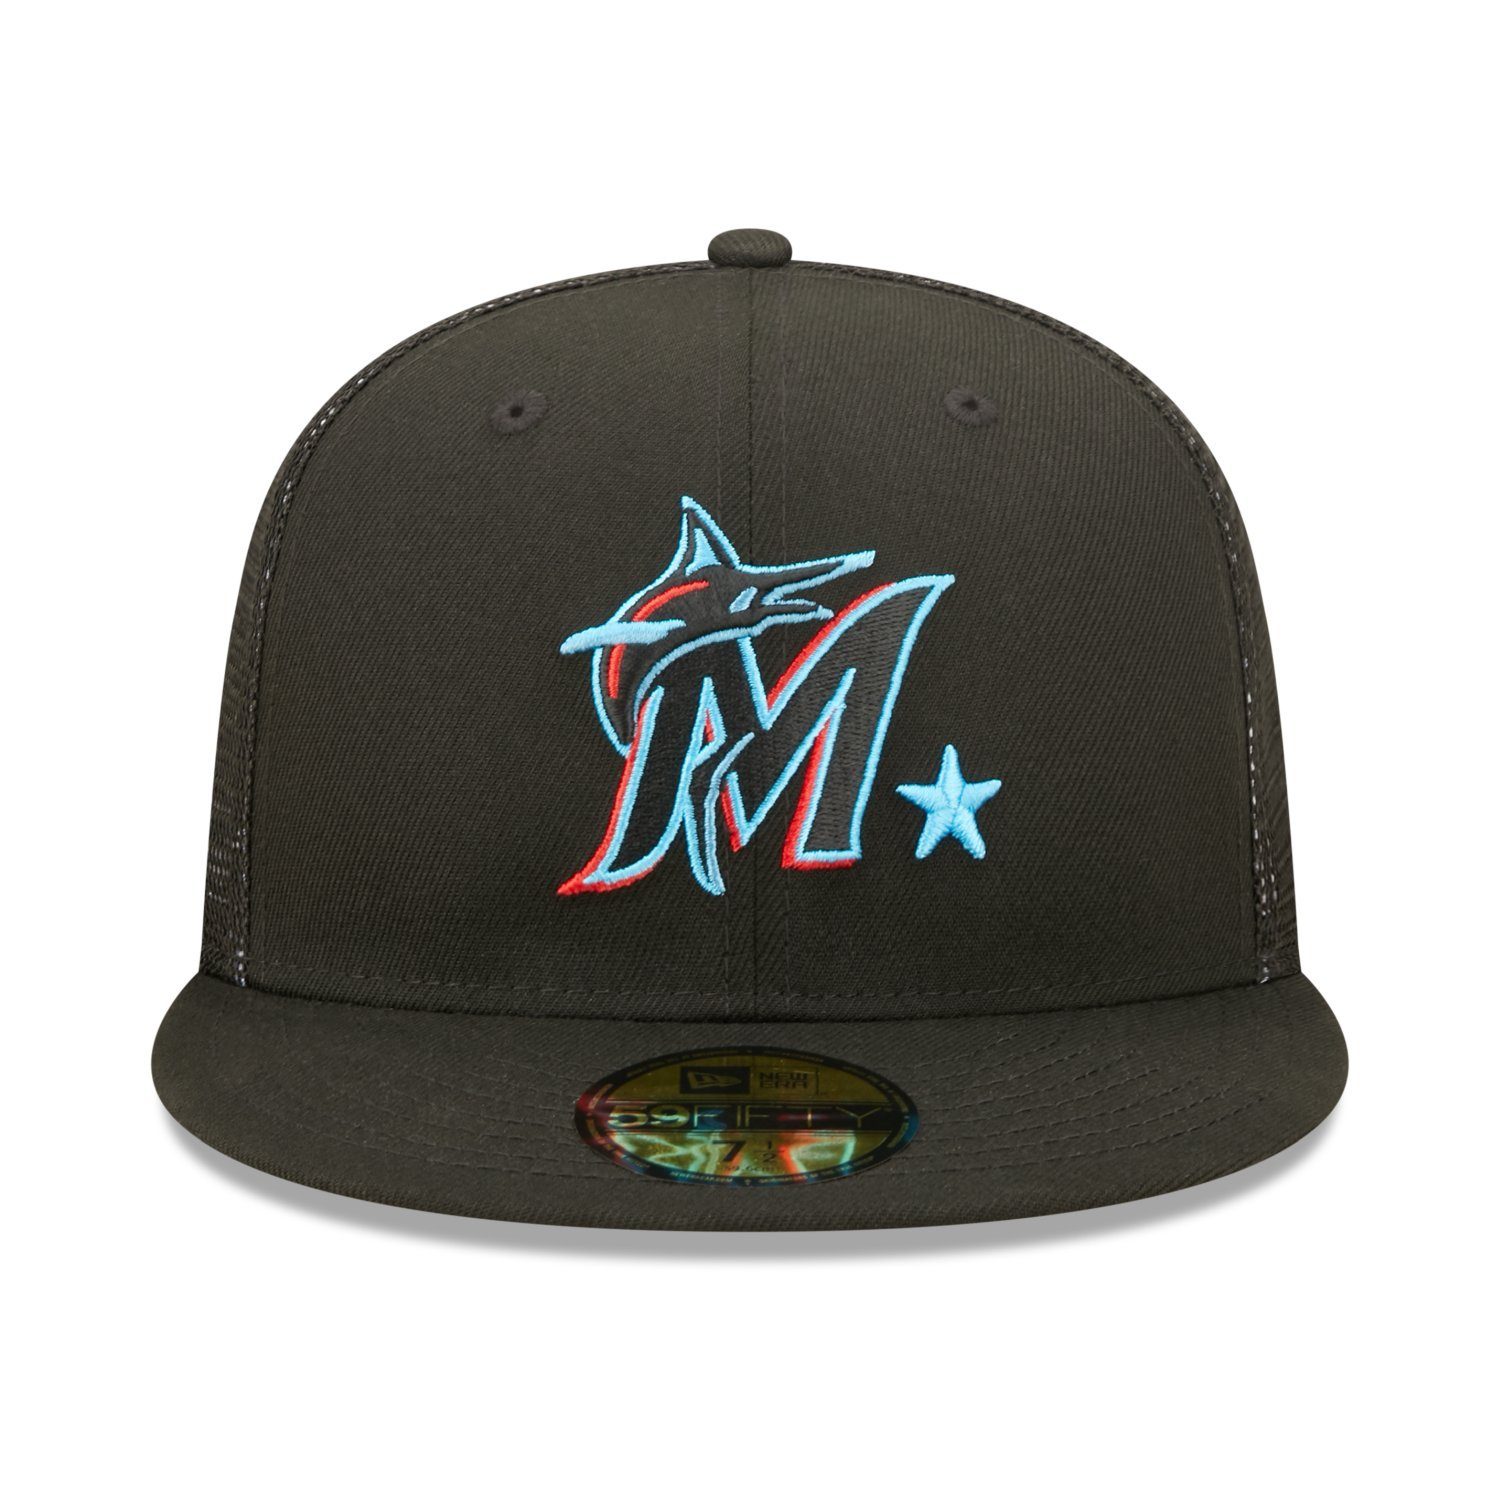 New Era Fitted Cap 59Fifty ALLSTAR Miami Marlins GAME